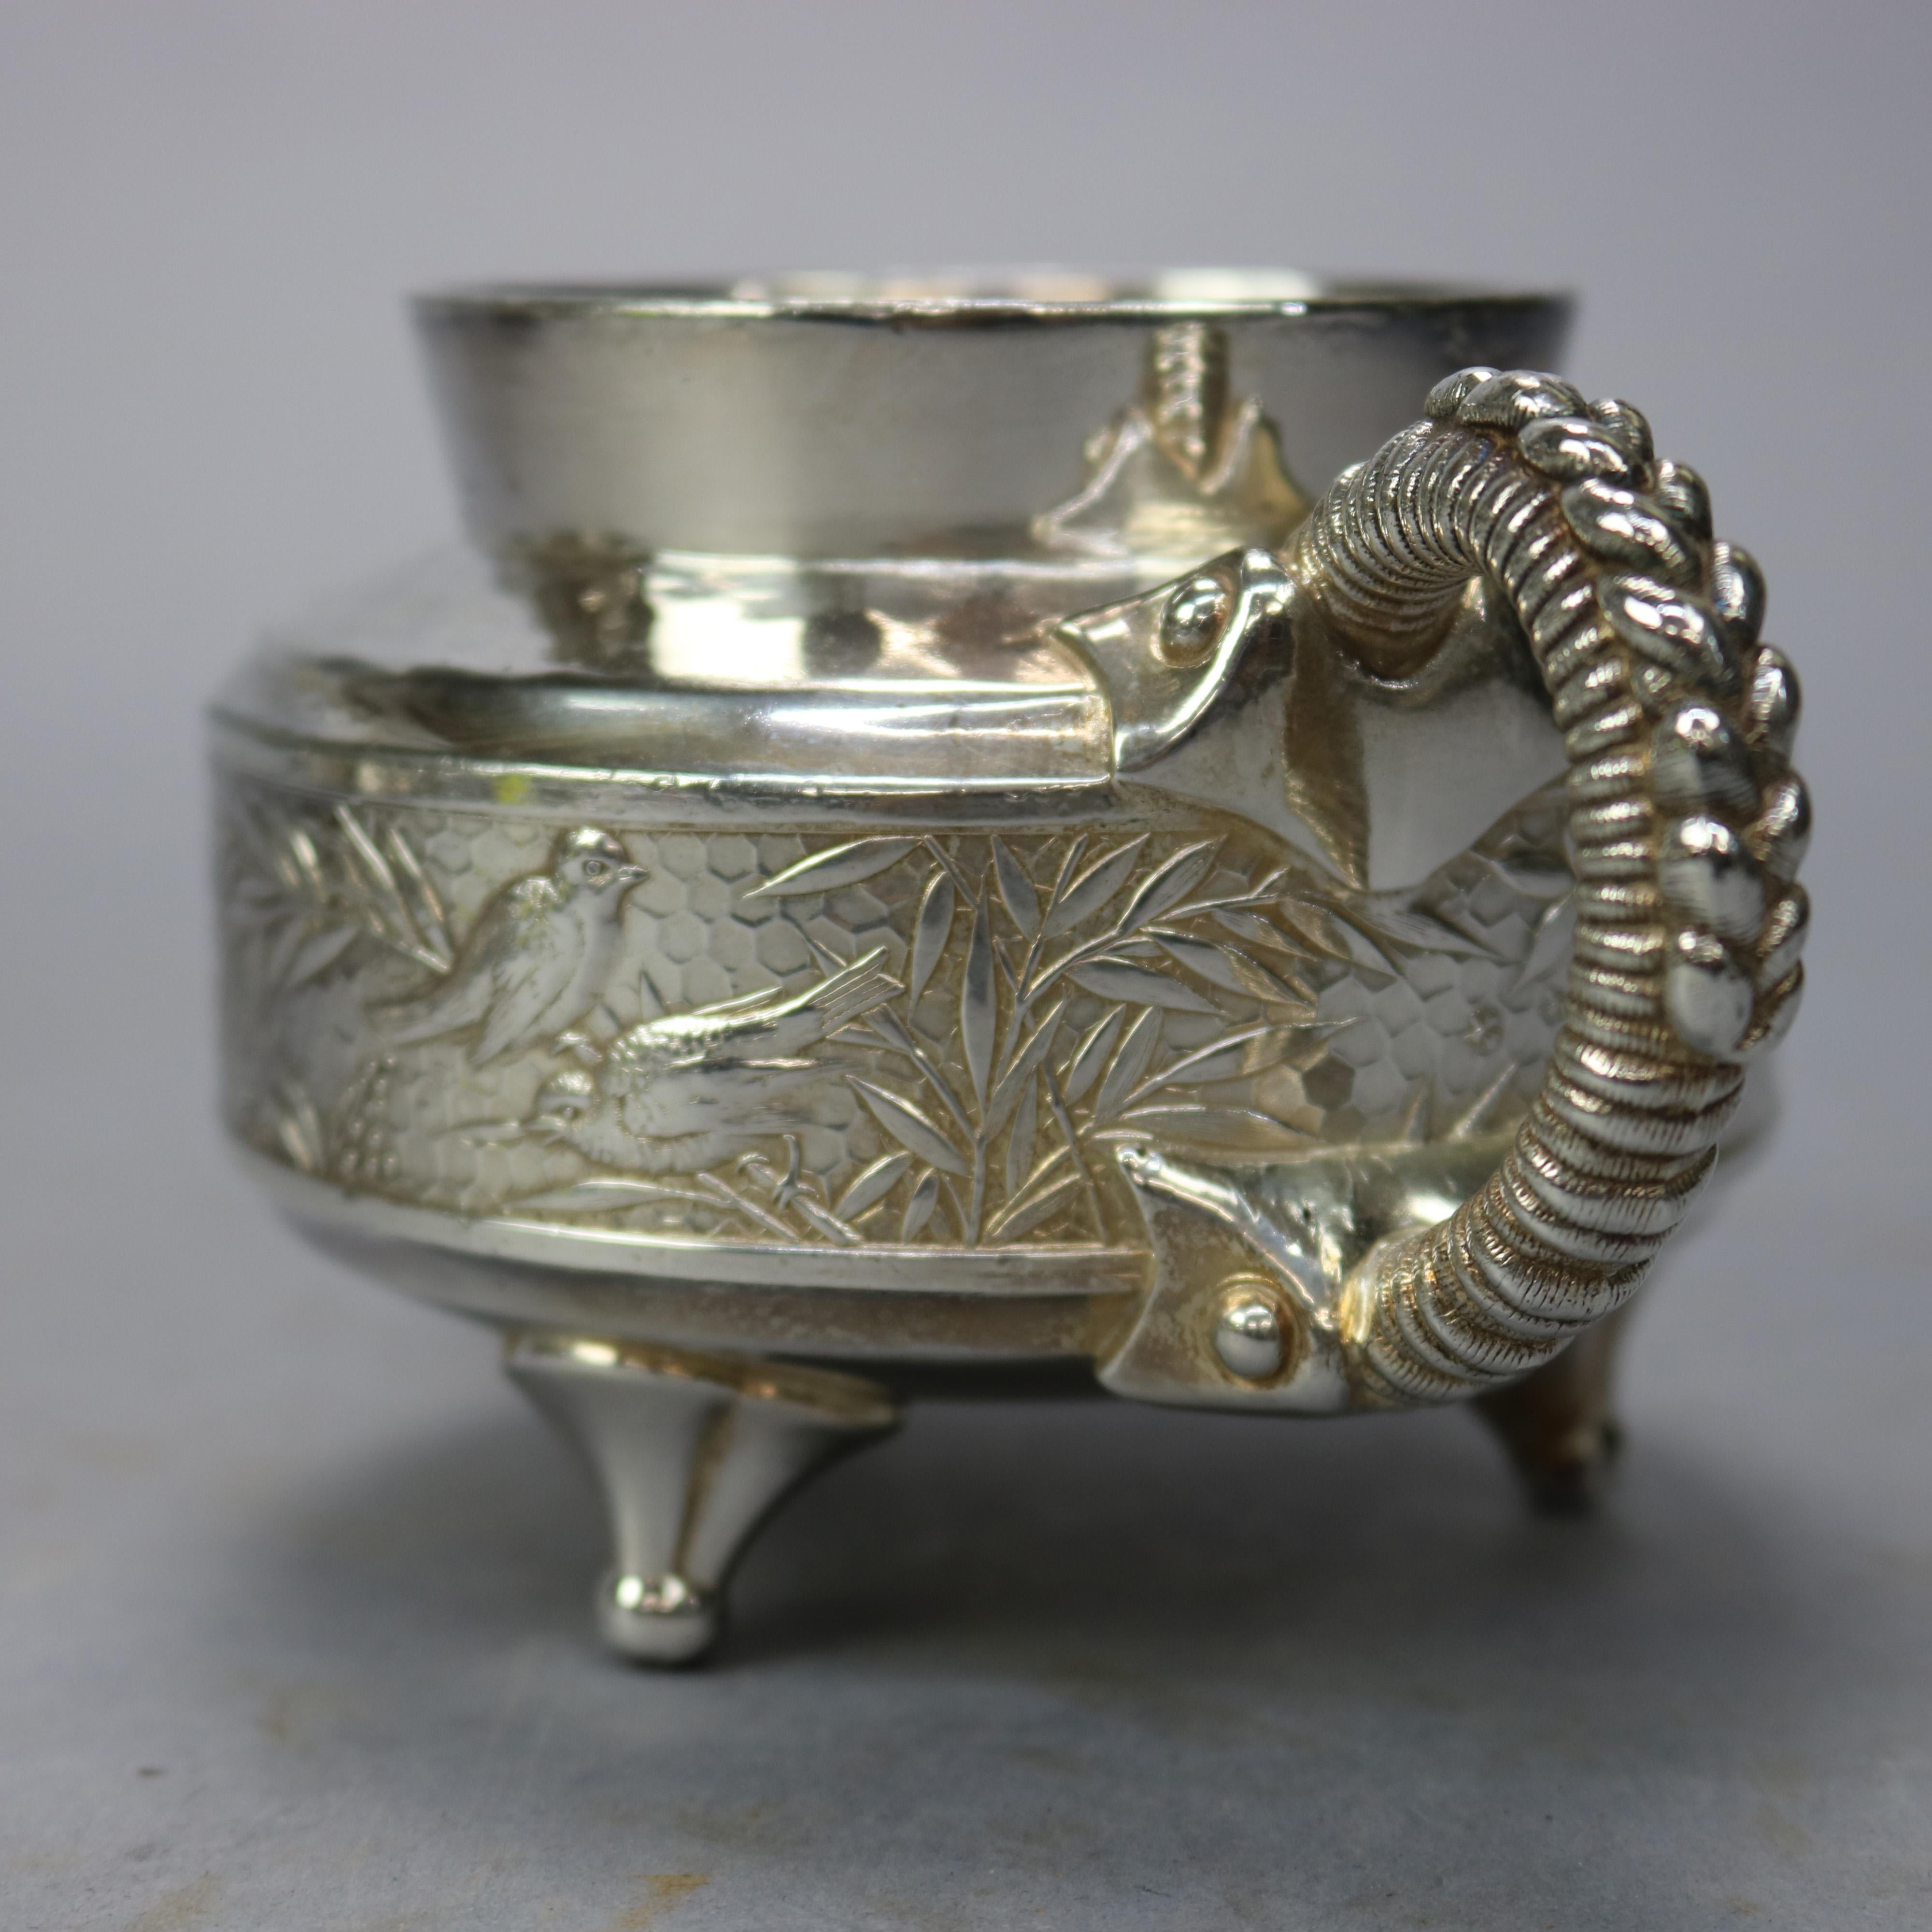 Antique Aesthetic Movement Hammered Silver Plate Tea Set by Rogers, 1870 7